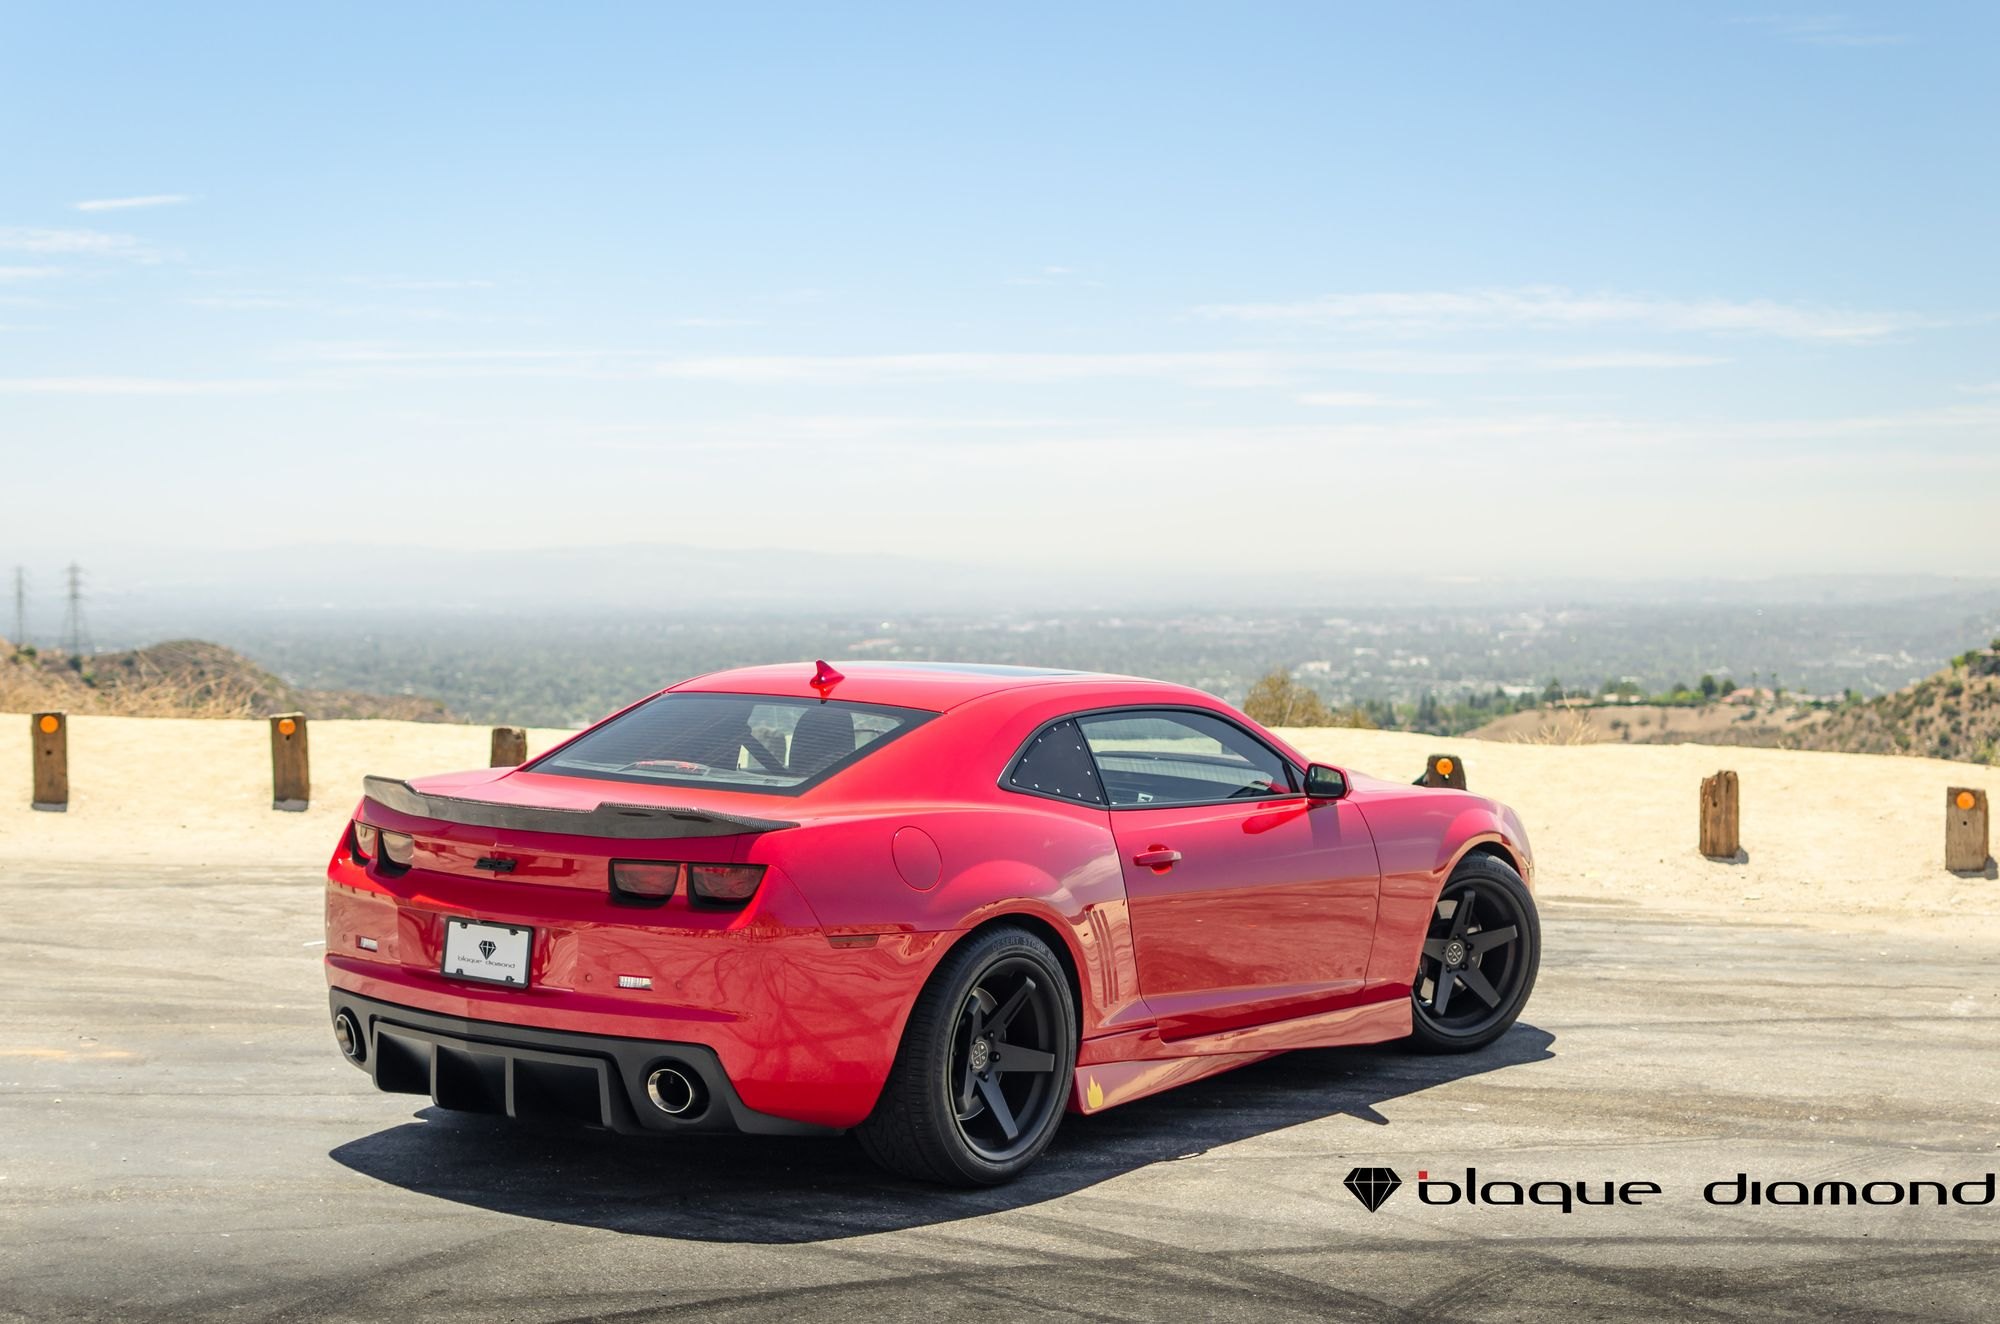 Aftermarket Rear Diffuser on Red Chevy Camaro - Photo by Blaque Diamond